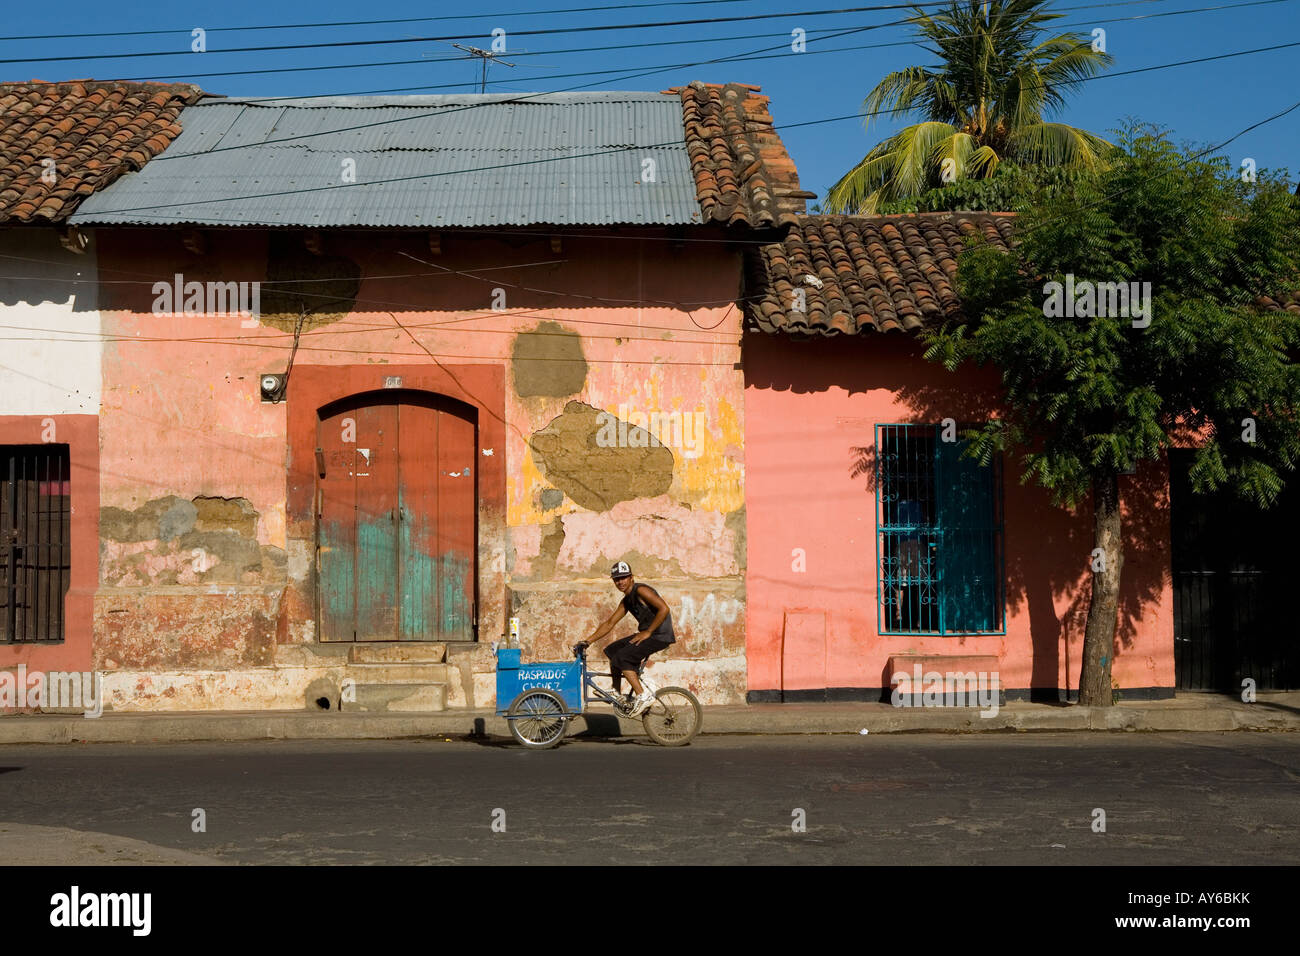 Vendor on bicycle colorful architecture Leon Nicaragua Stock Photo